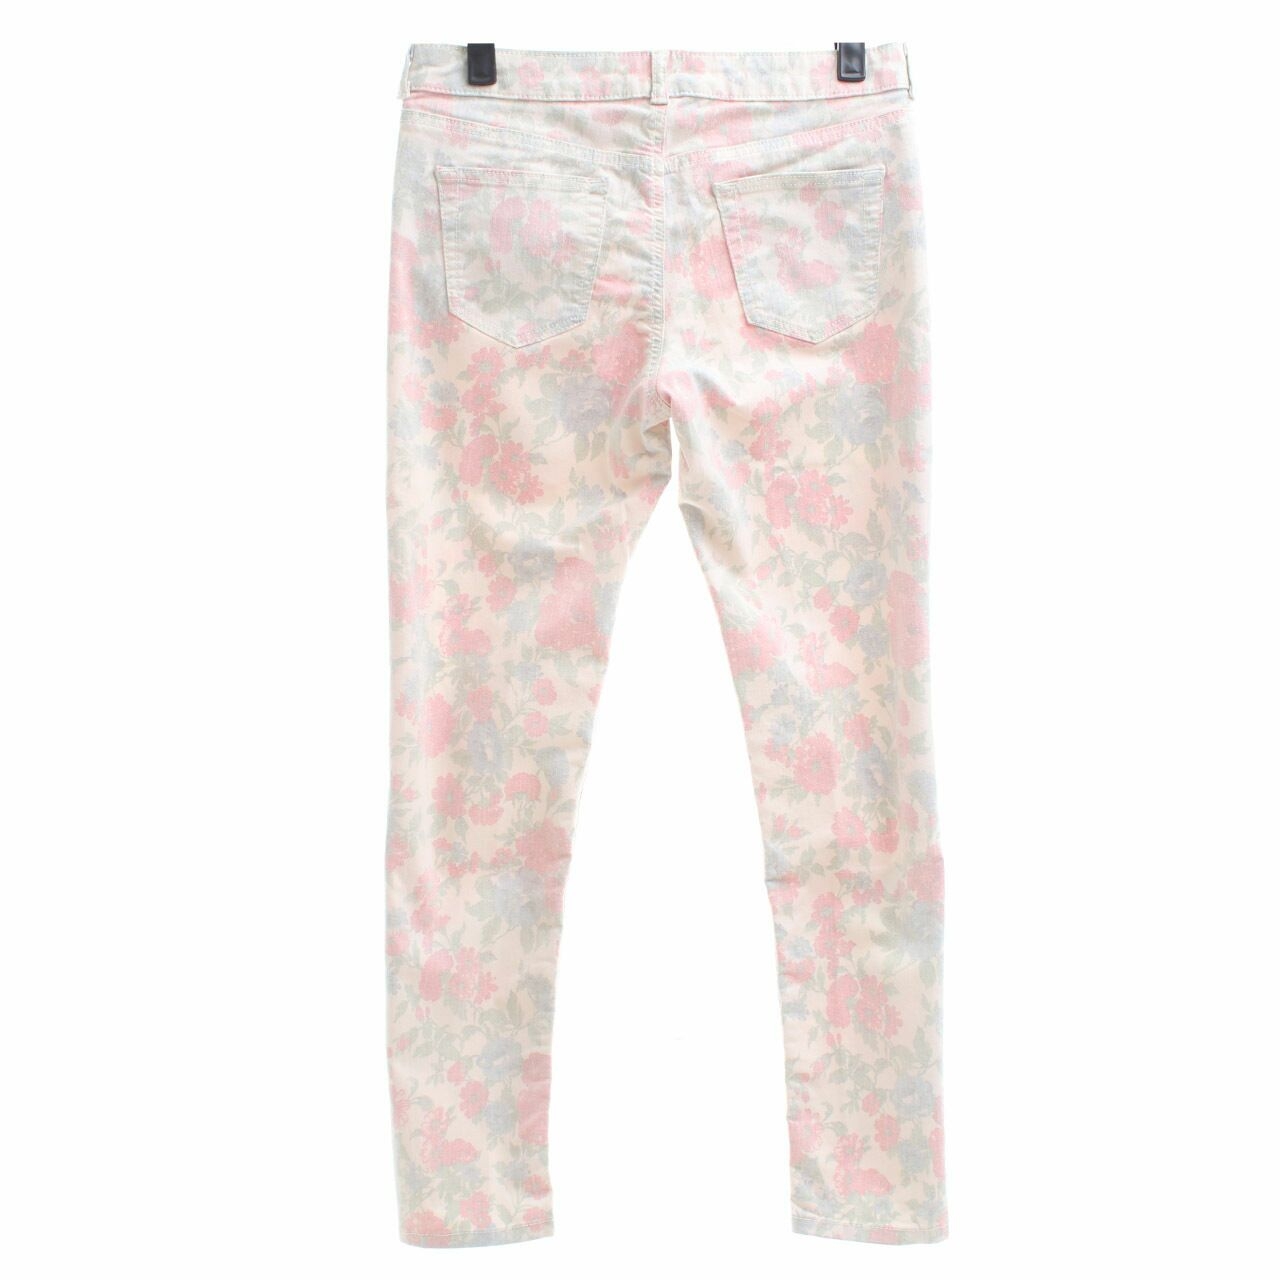 United Colors Of Benetton Cream Floral Skinny Long Pants